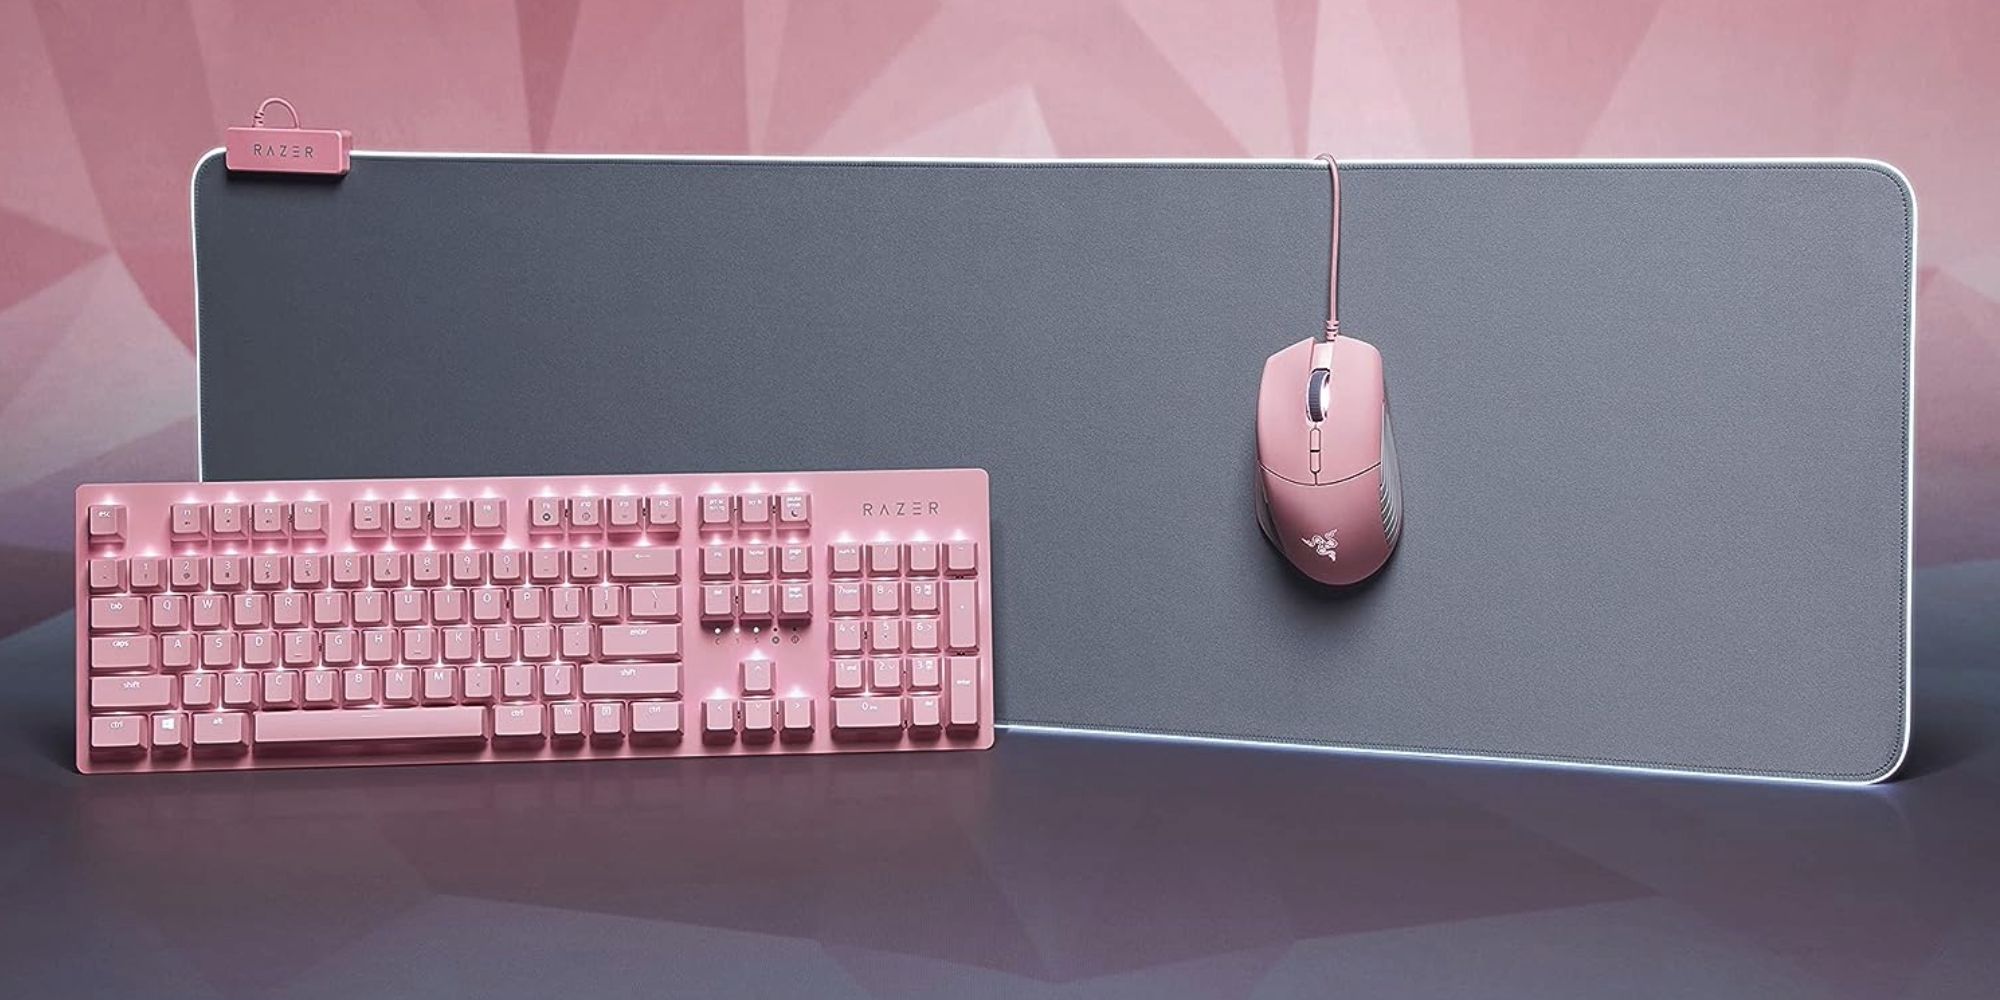 A large grey mouse pad with pink accents is displayed with a matching pink keyboard and mouse. 